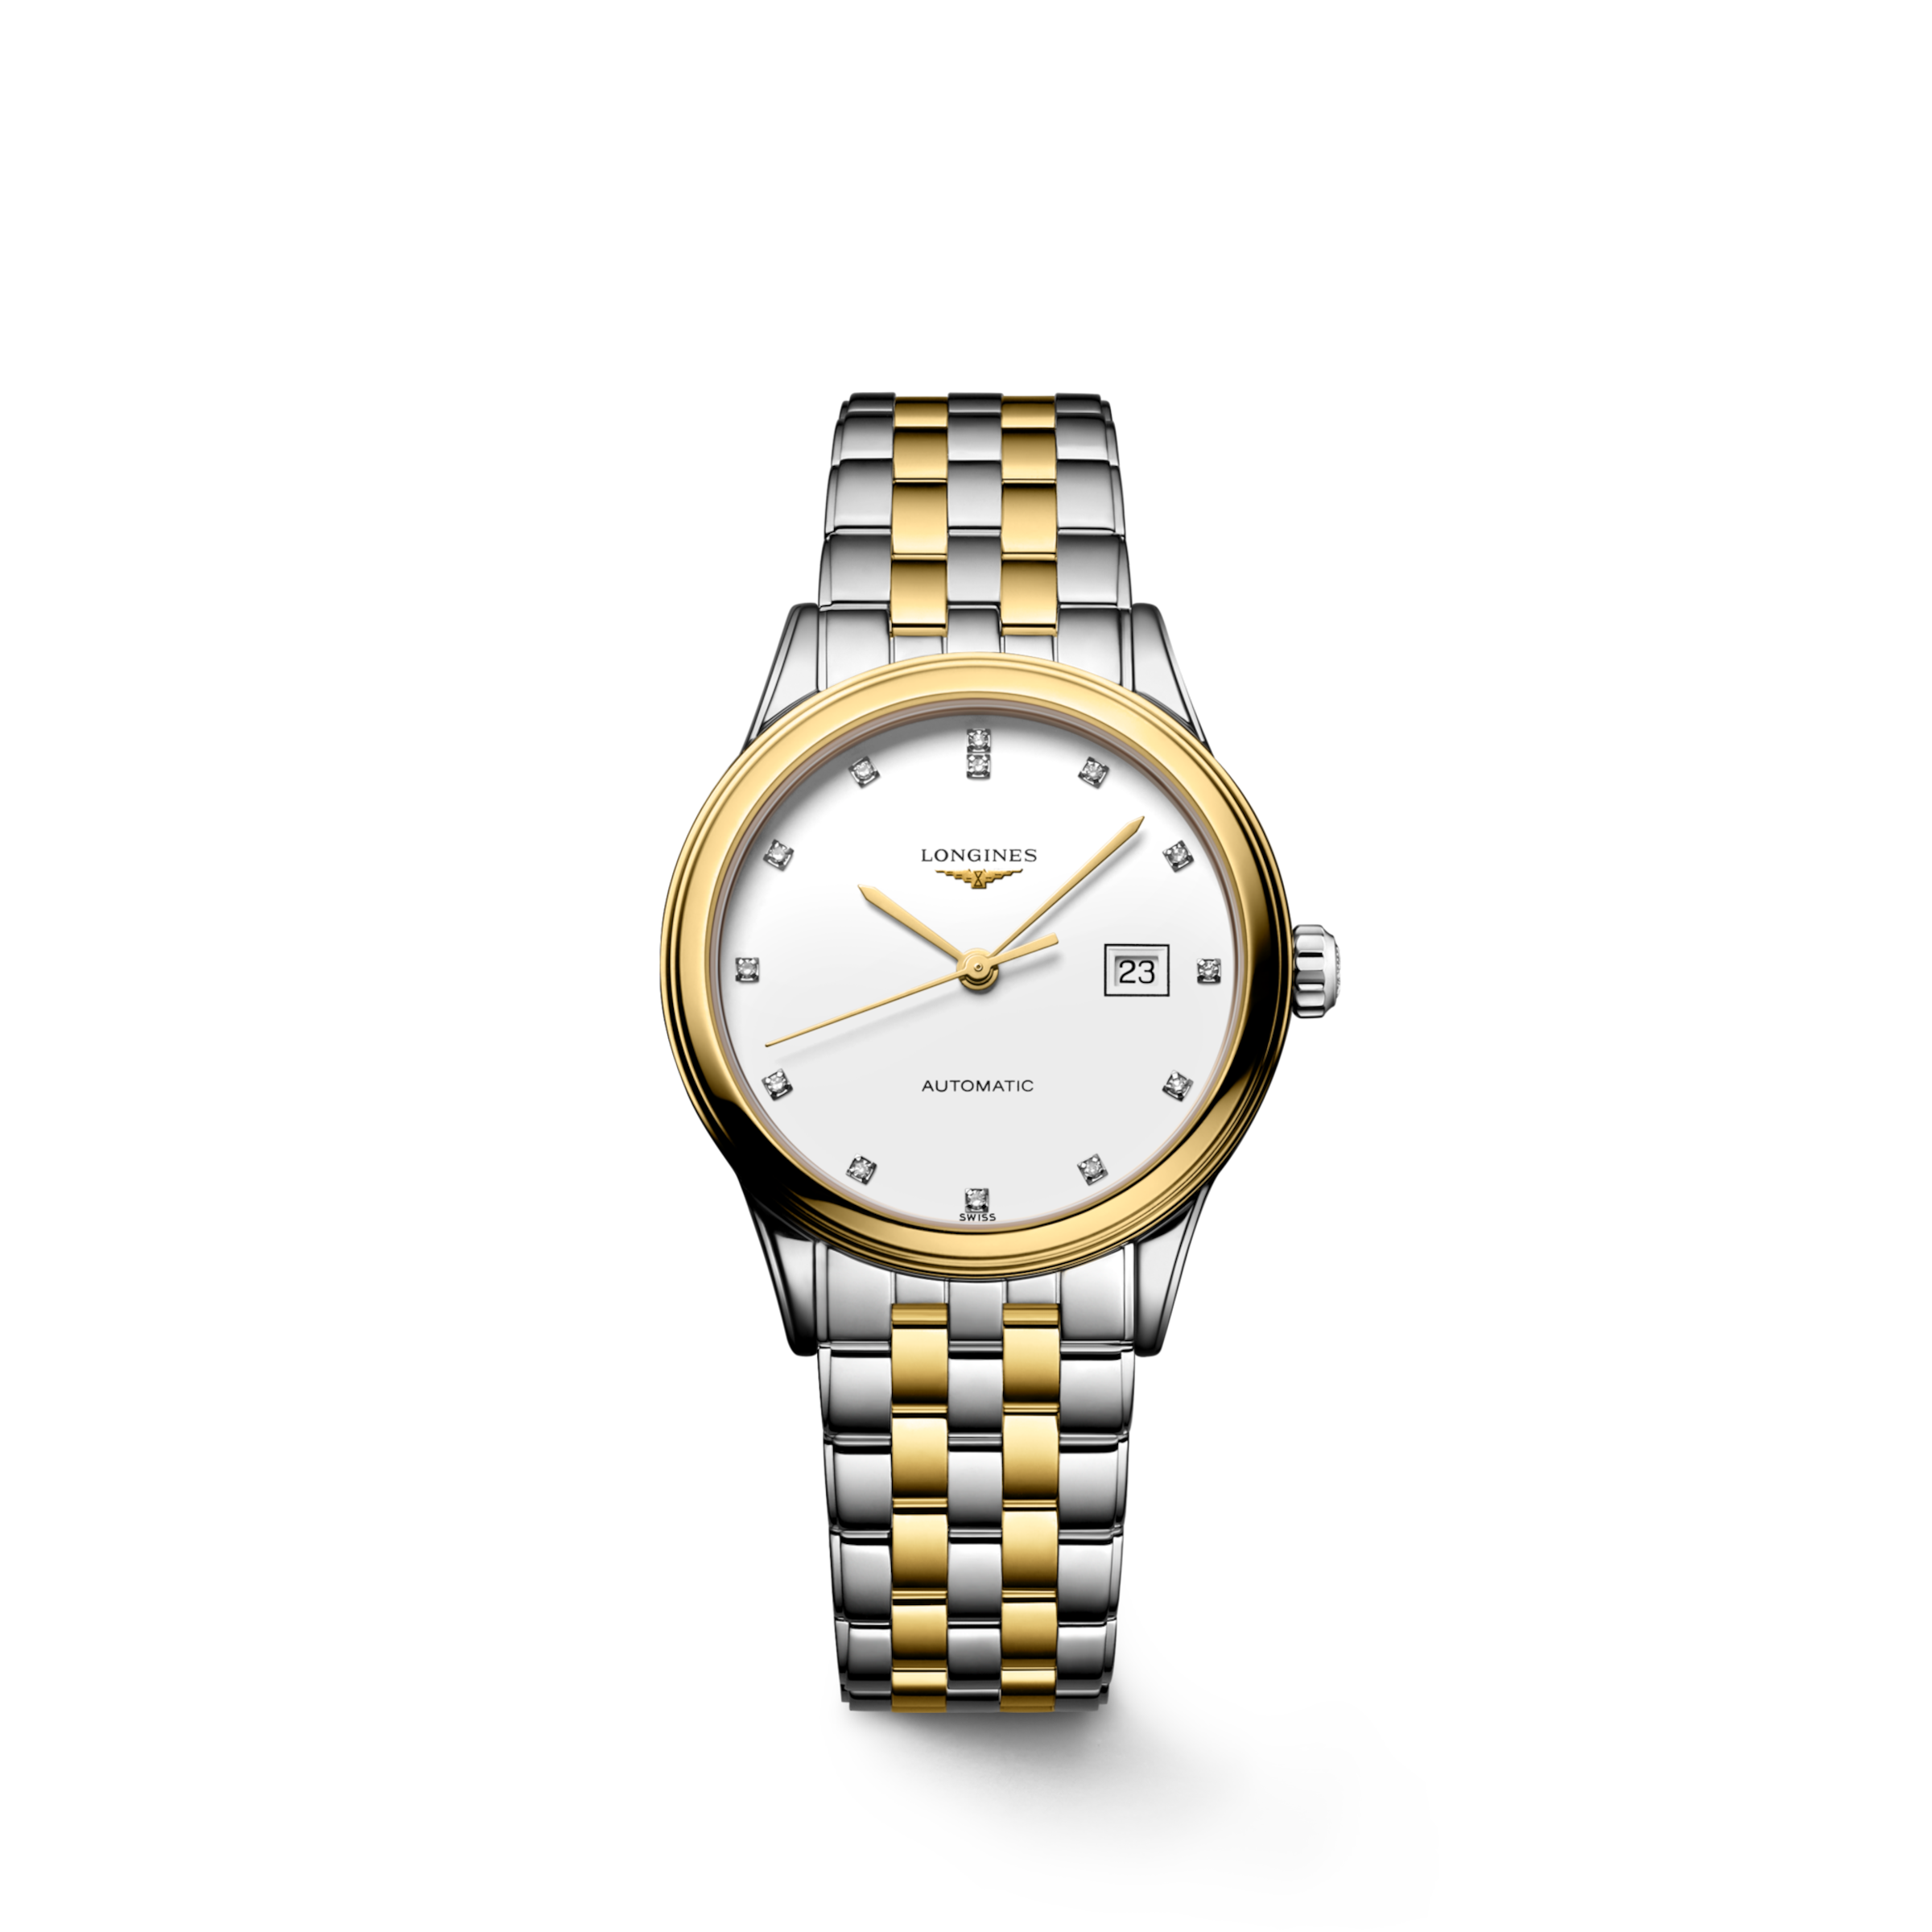 Longines FLAGSHIP Automatic Stainless steel and yellow PVD coating Watch - L4.374.3.27.7